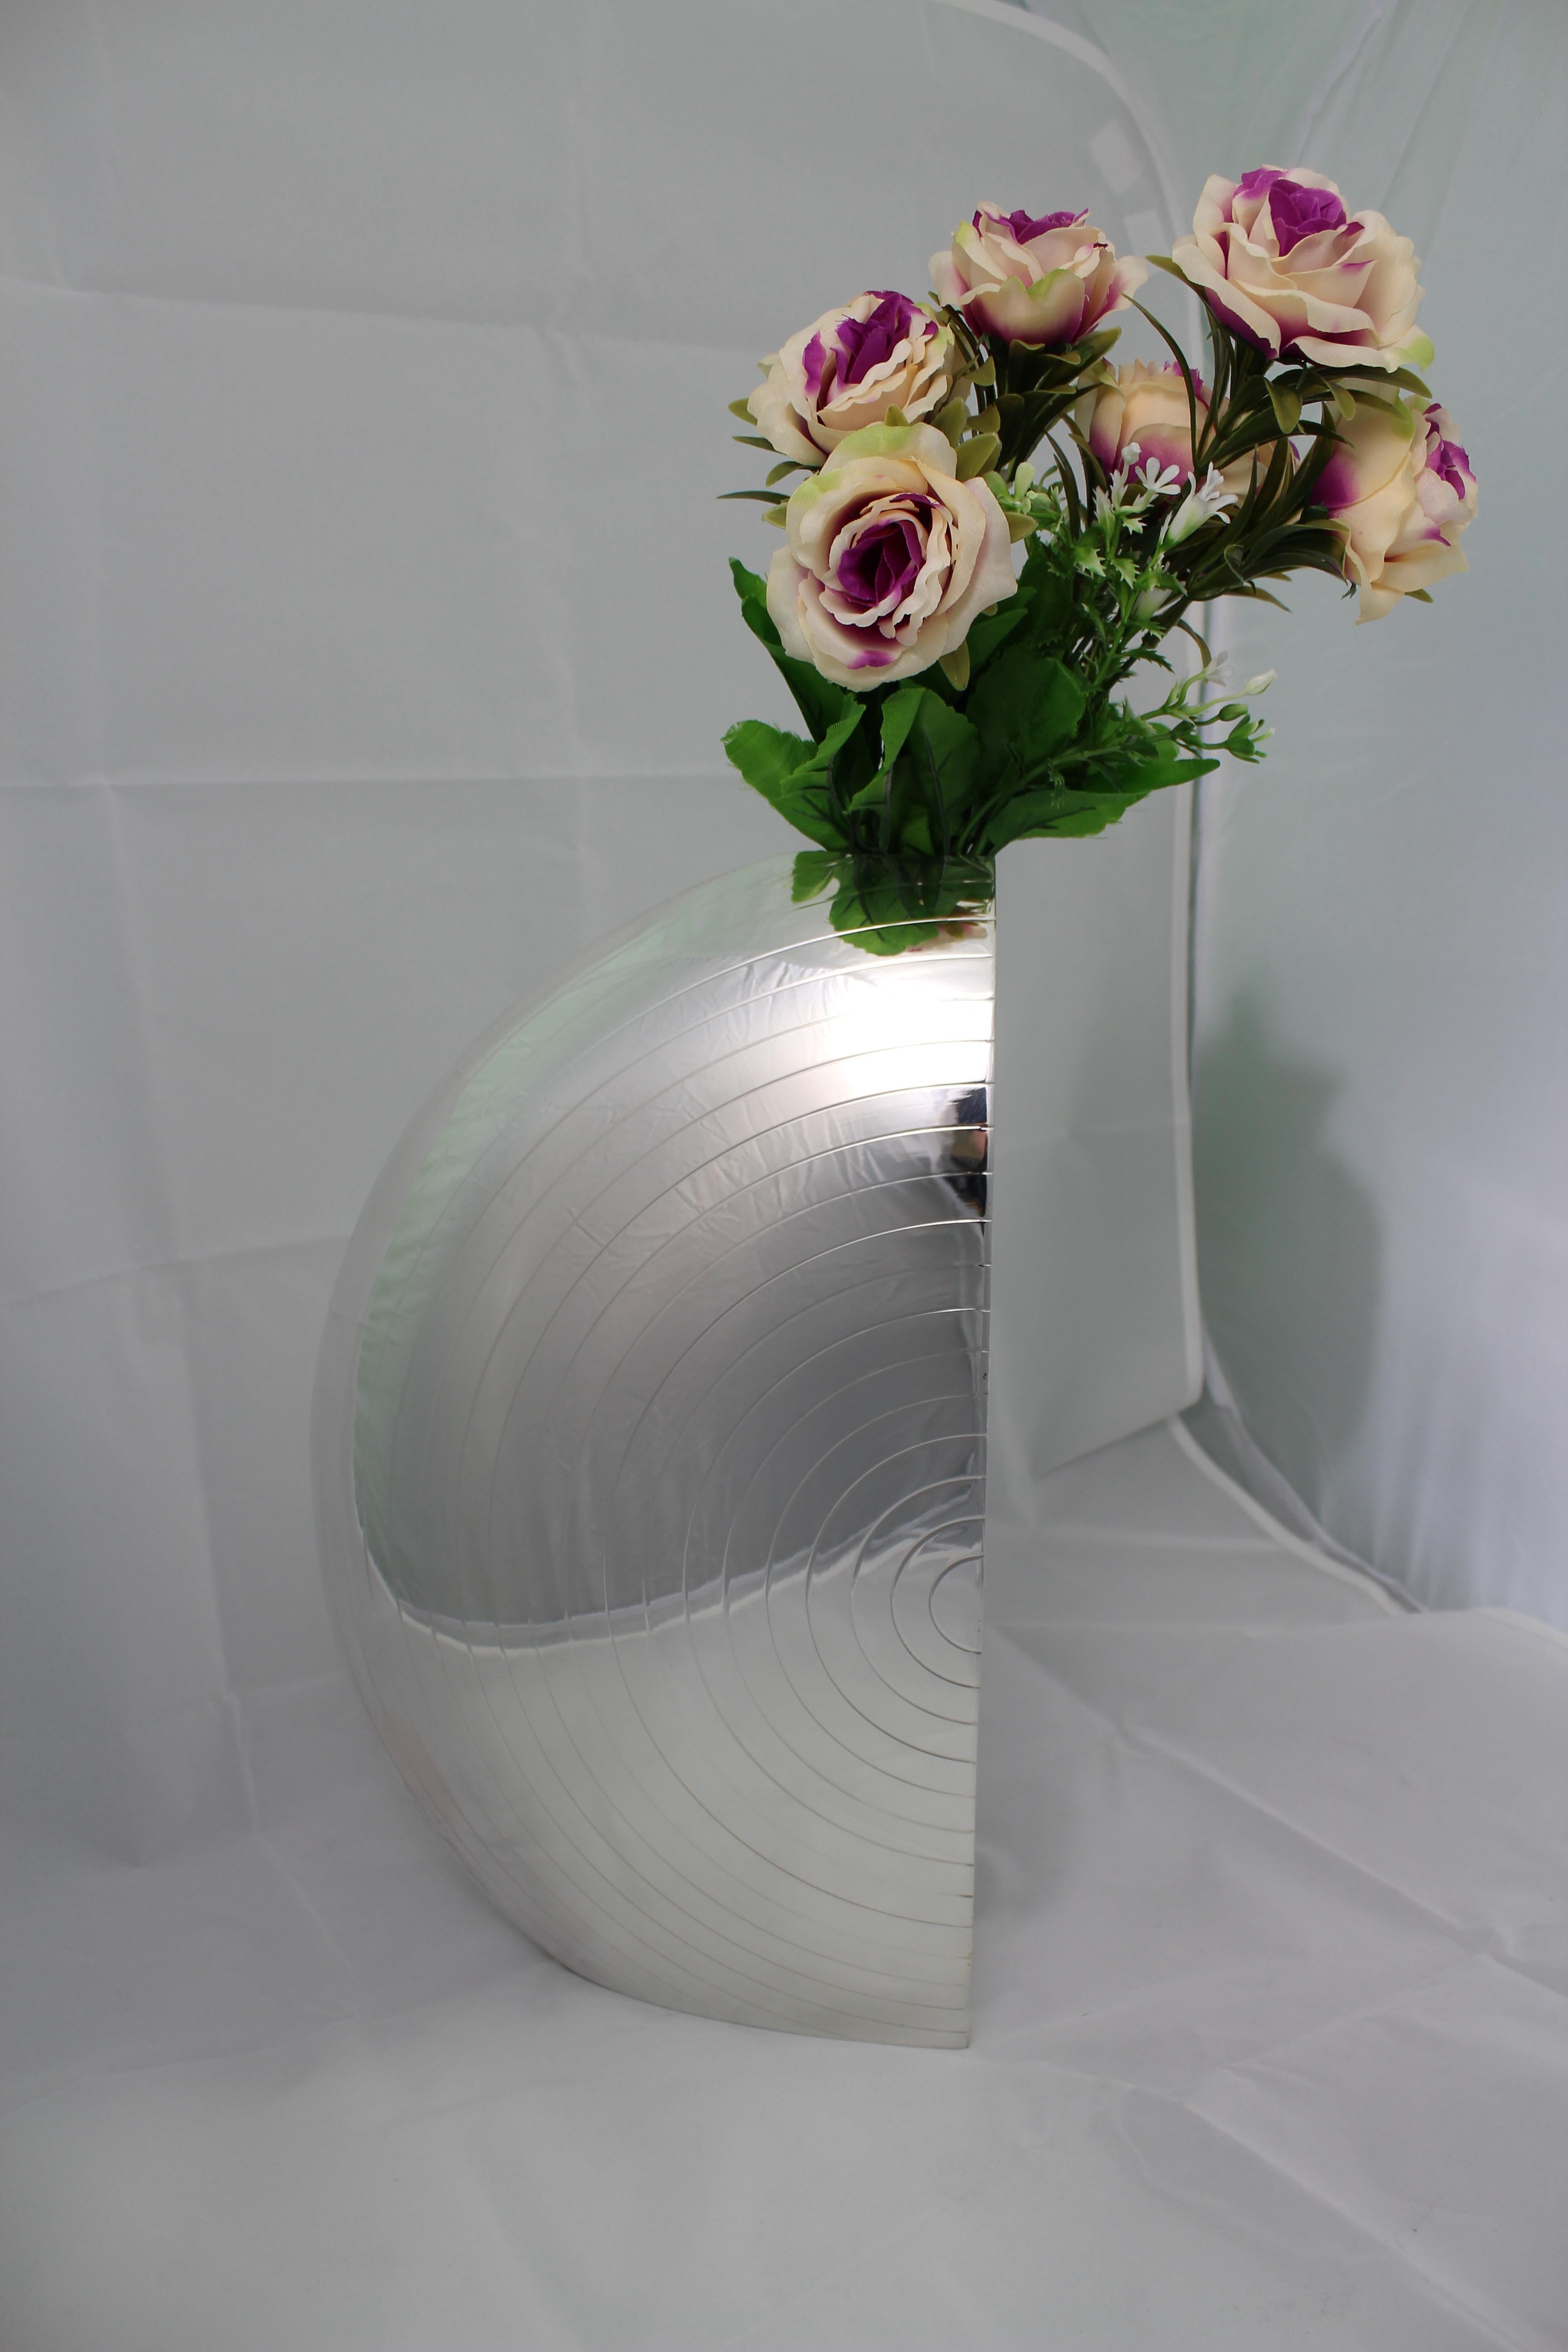 Hand-Crafted 20th Century Futurist Silver Sail Flower Vase by Luigi Diani Milan Italy, 1920s For Sale